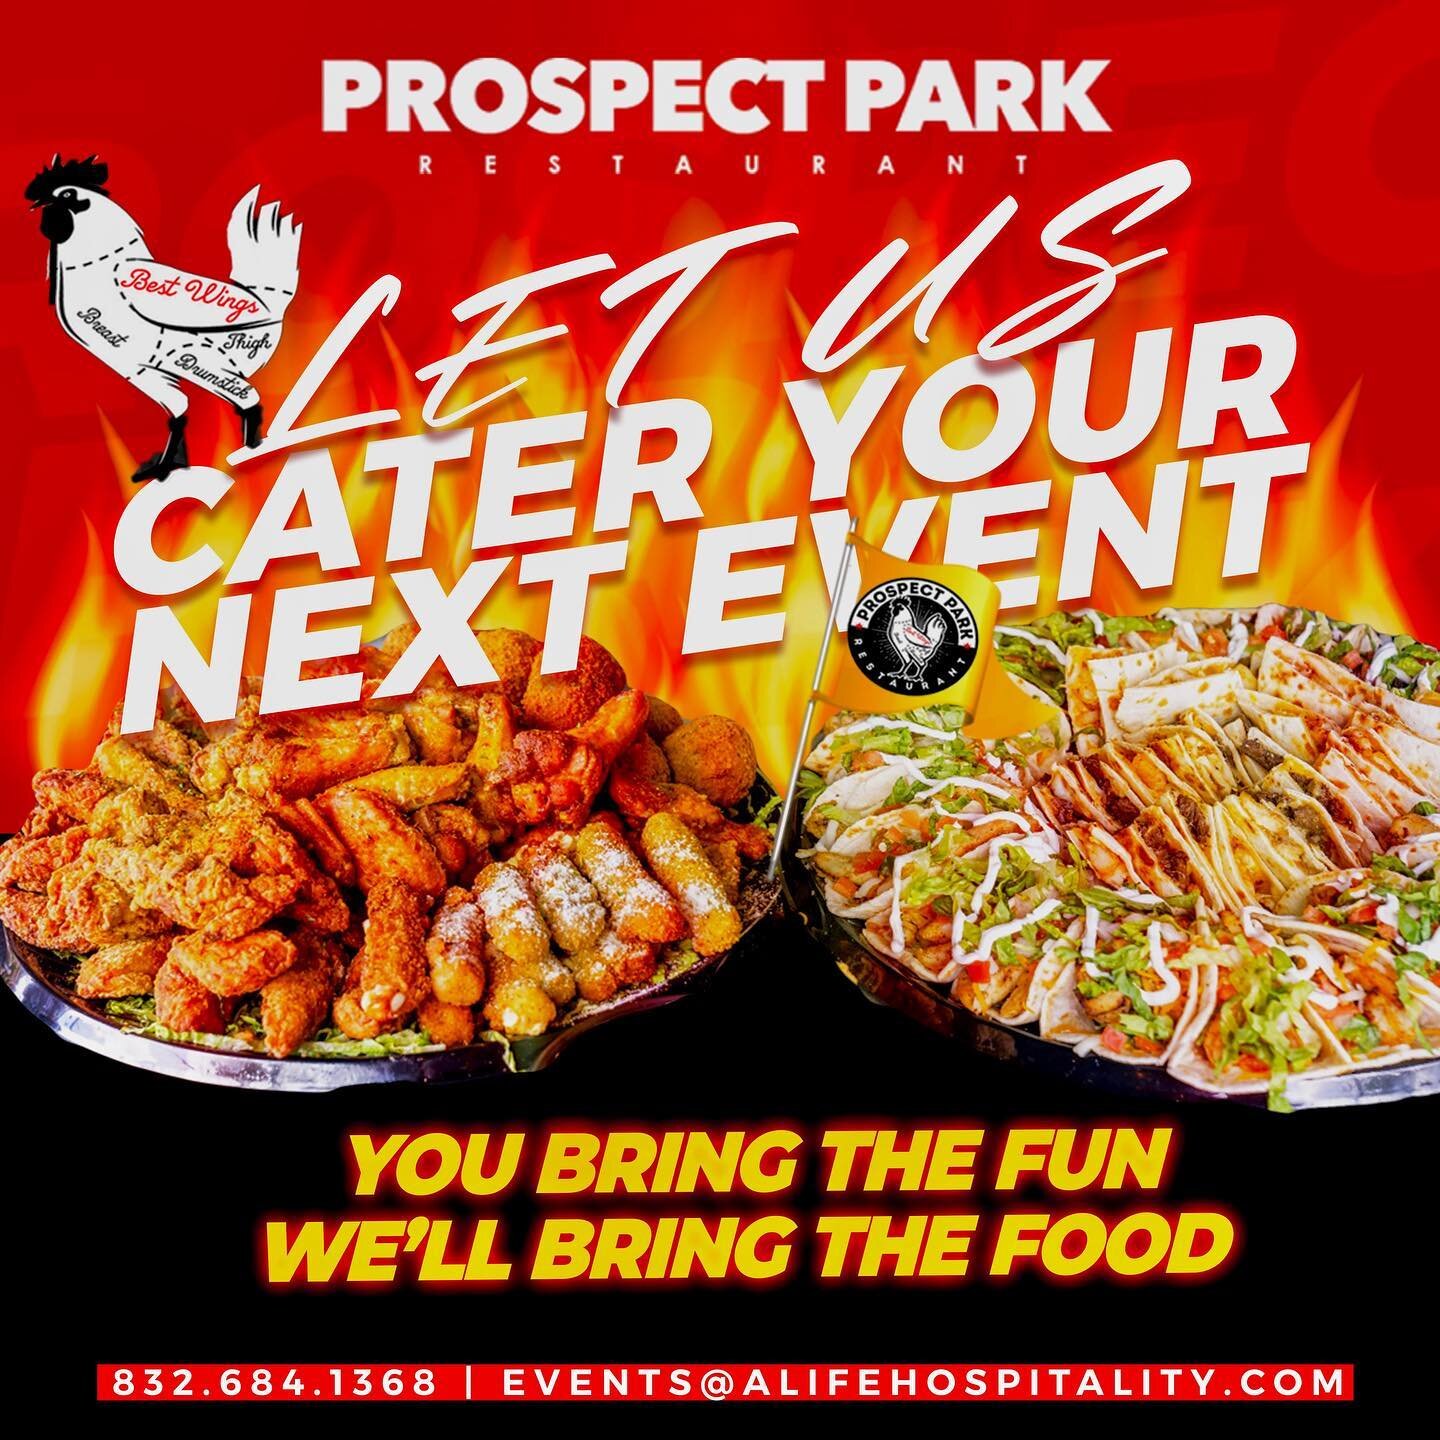 Let Prospect cater your next event! Contact our catering director at 832.684.1368 or email us at events@alifehospitality.com #ThePark🌳